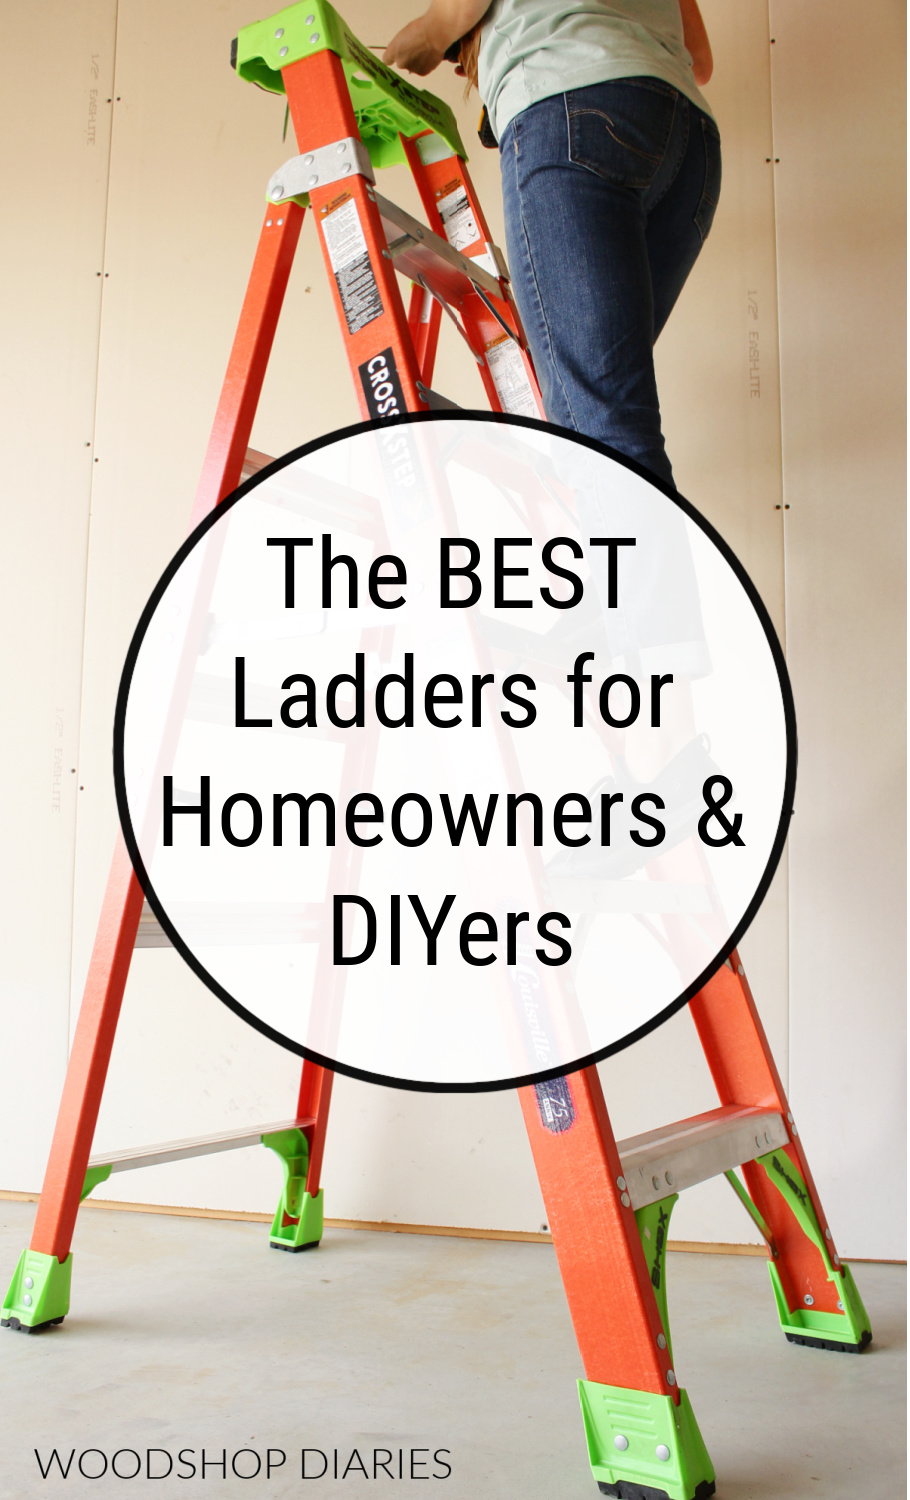 Shara Woodshop Diaries on ladder with round graphic overlay reading "The Best Ladders for Homeowners & DIYers"